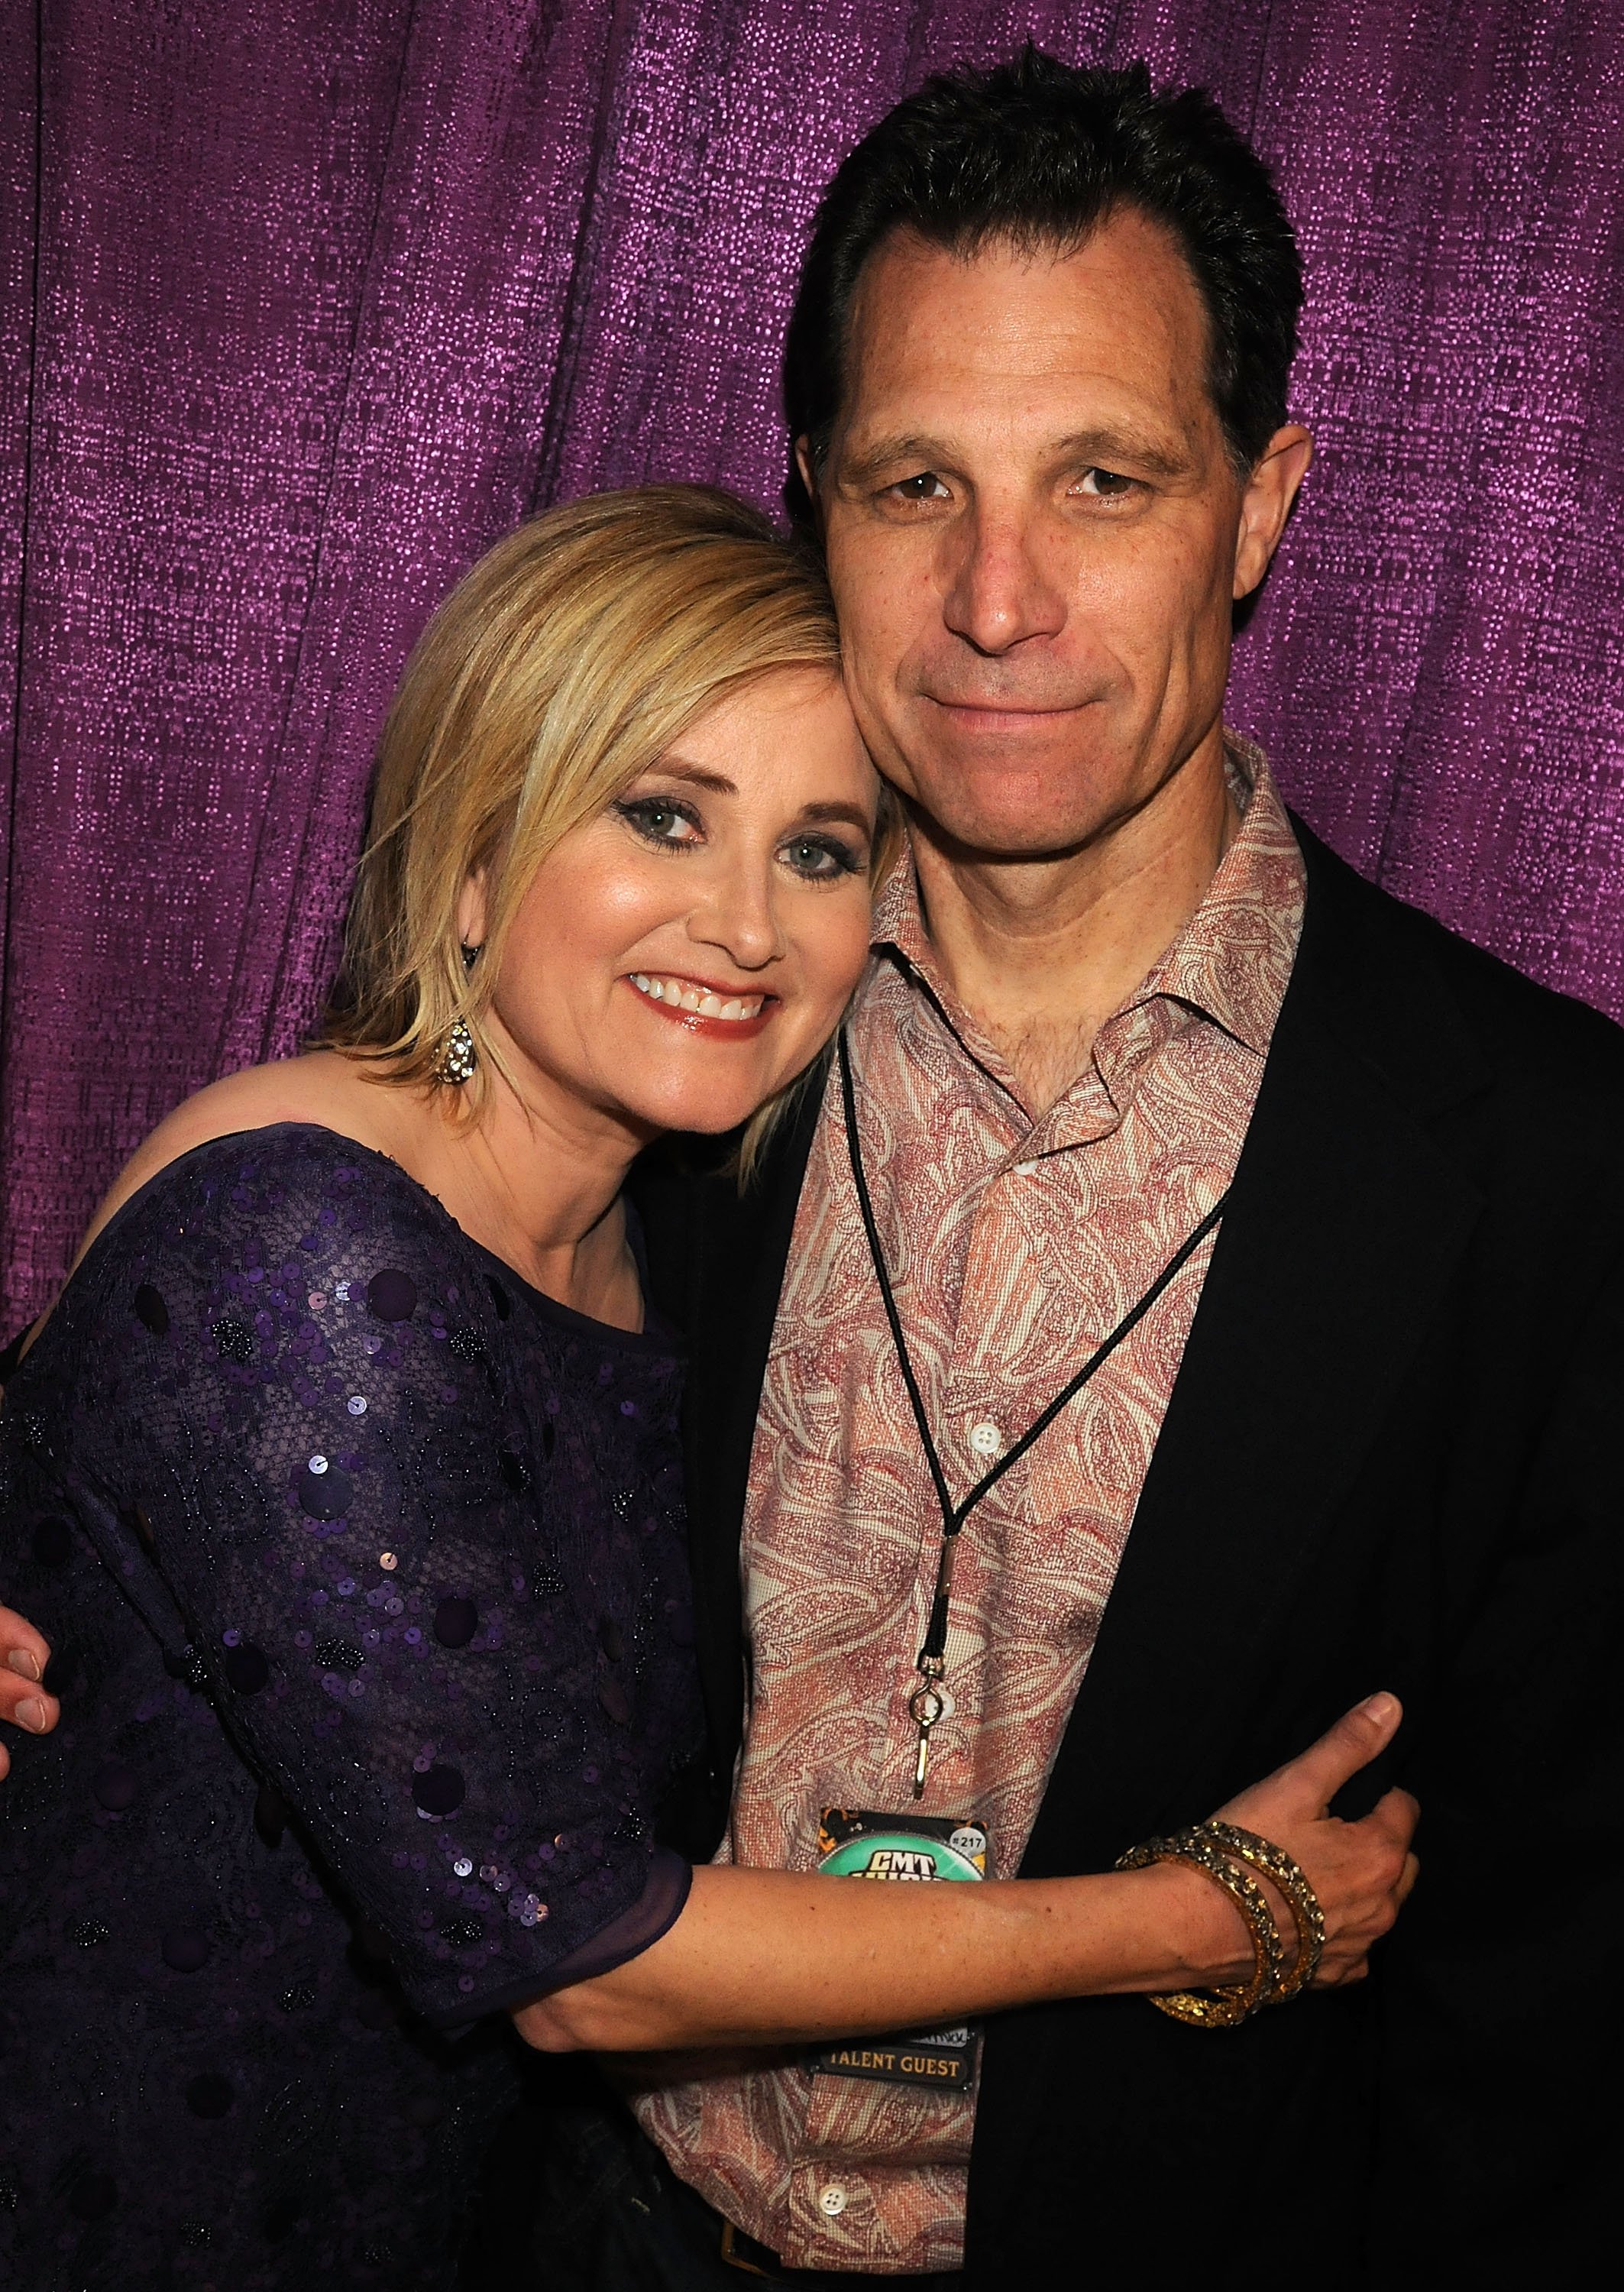 Actress Maureen McCormick and Michael Cummings on April 14, 2008 in Nashville, Tennessee | Source: Getty Images